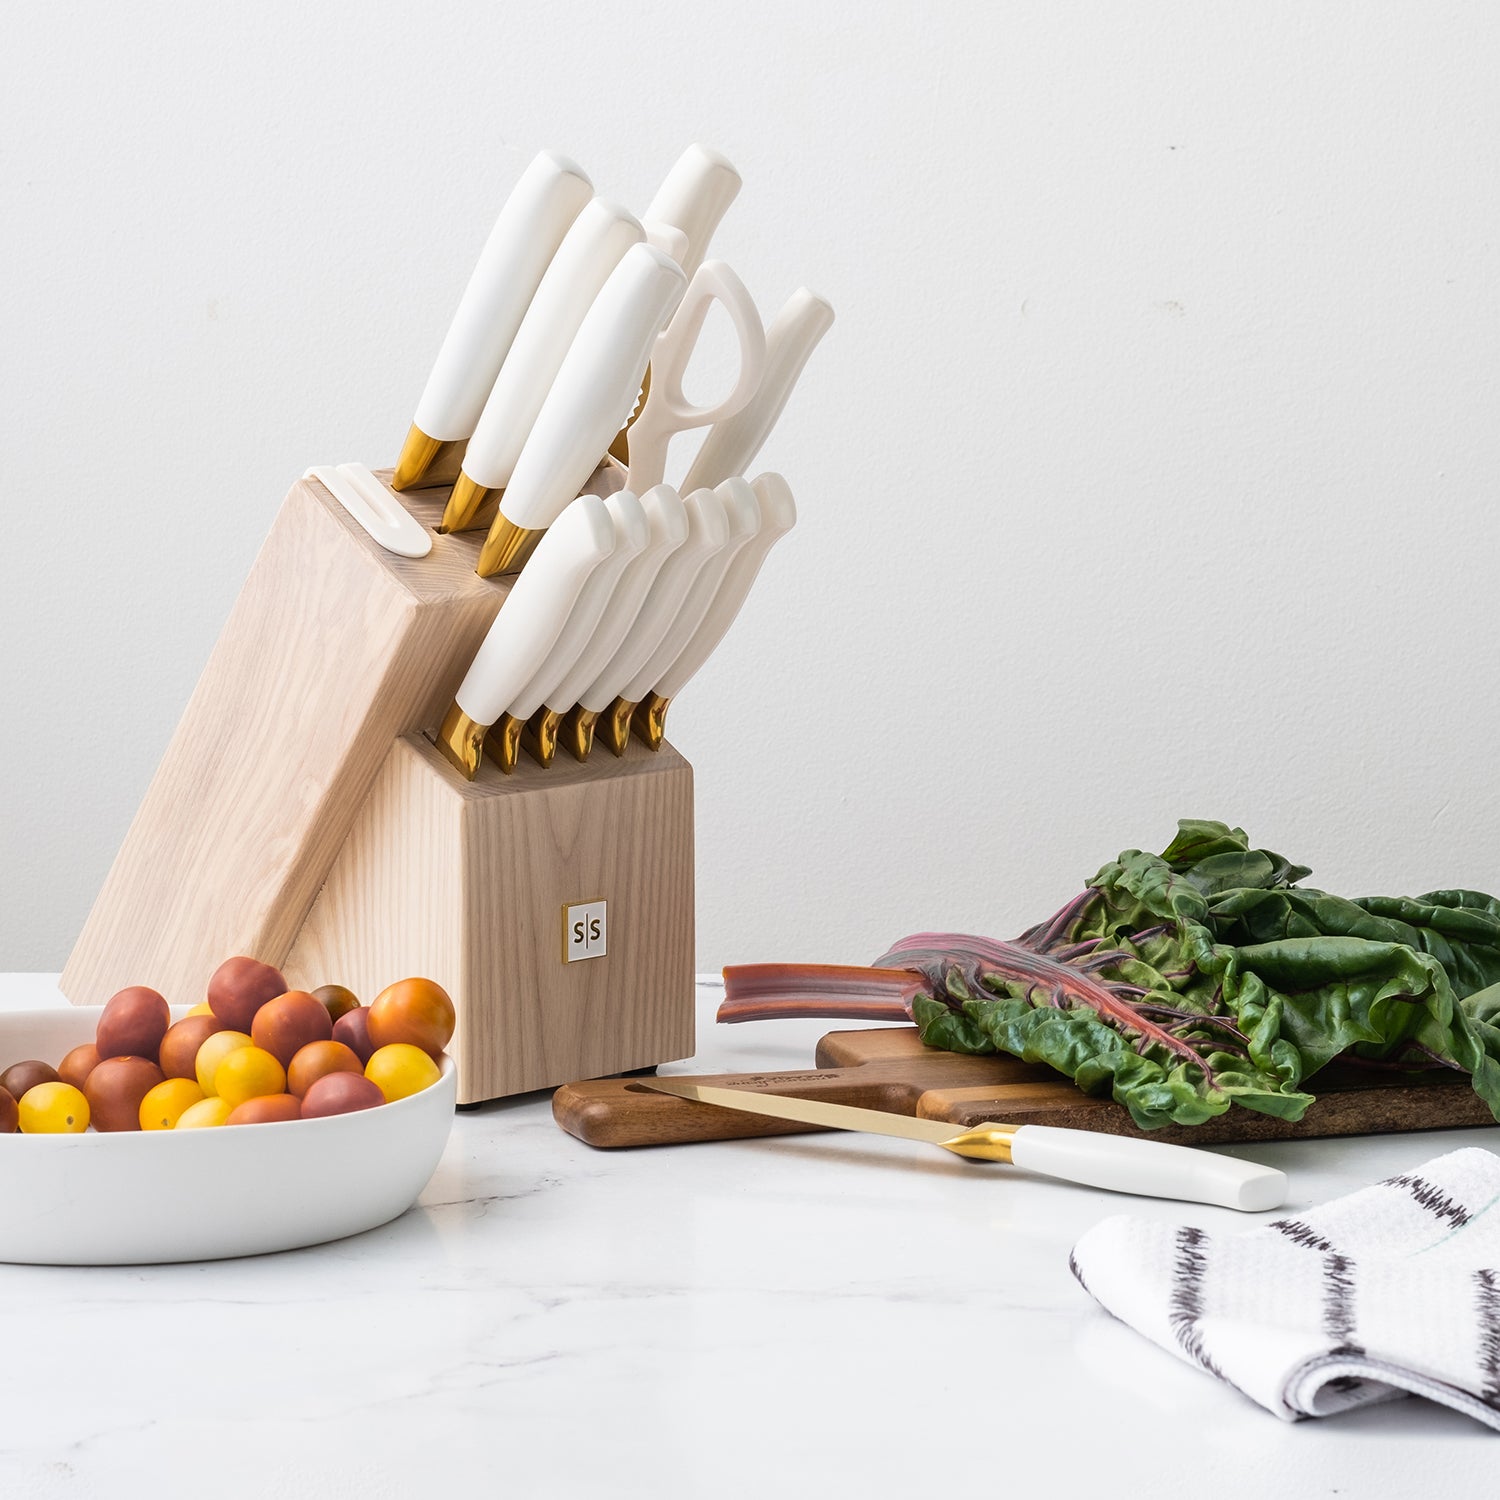 and Gold Knife Set with Block Self Sharpening - 14 PC Coated Gold and White  Kitchen Knife Set and White Knife Block with Sharpe - AliExpress